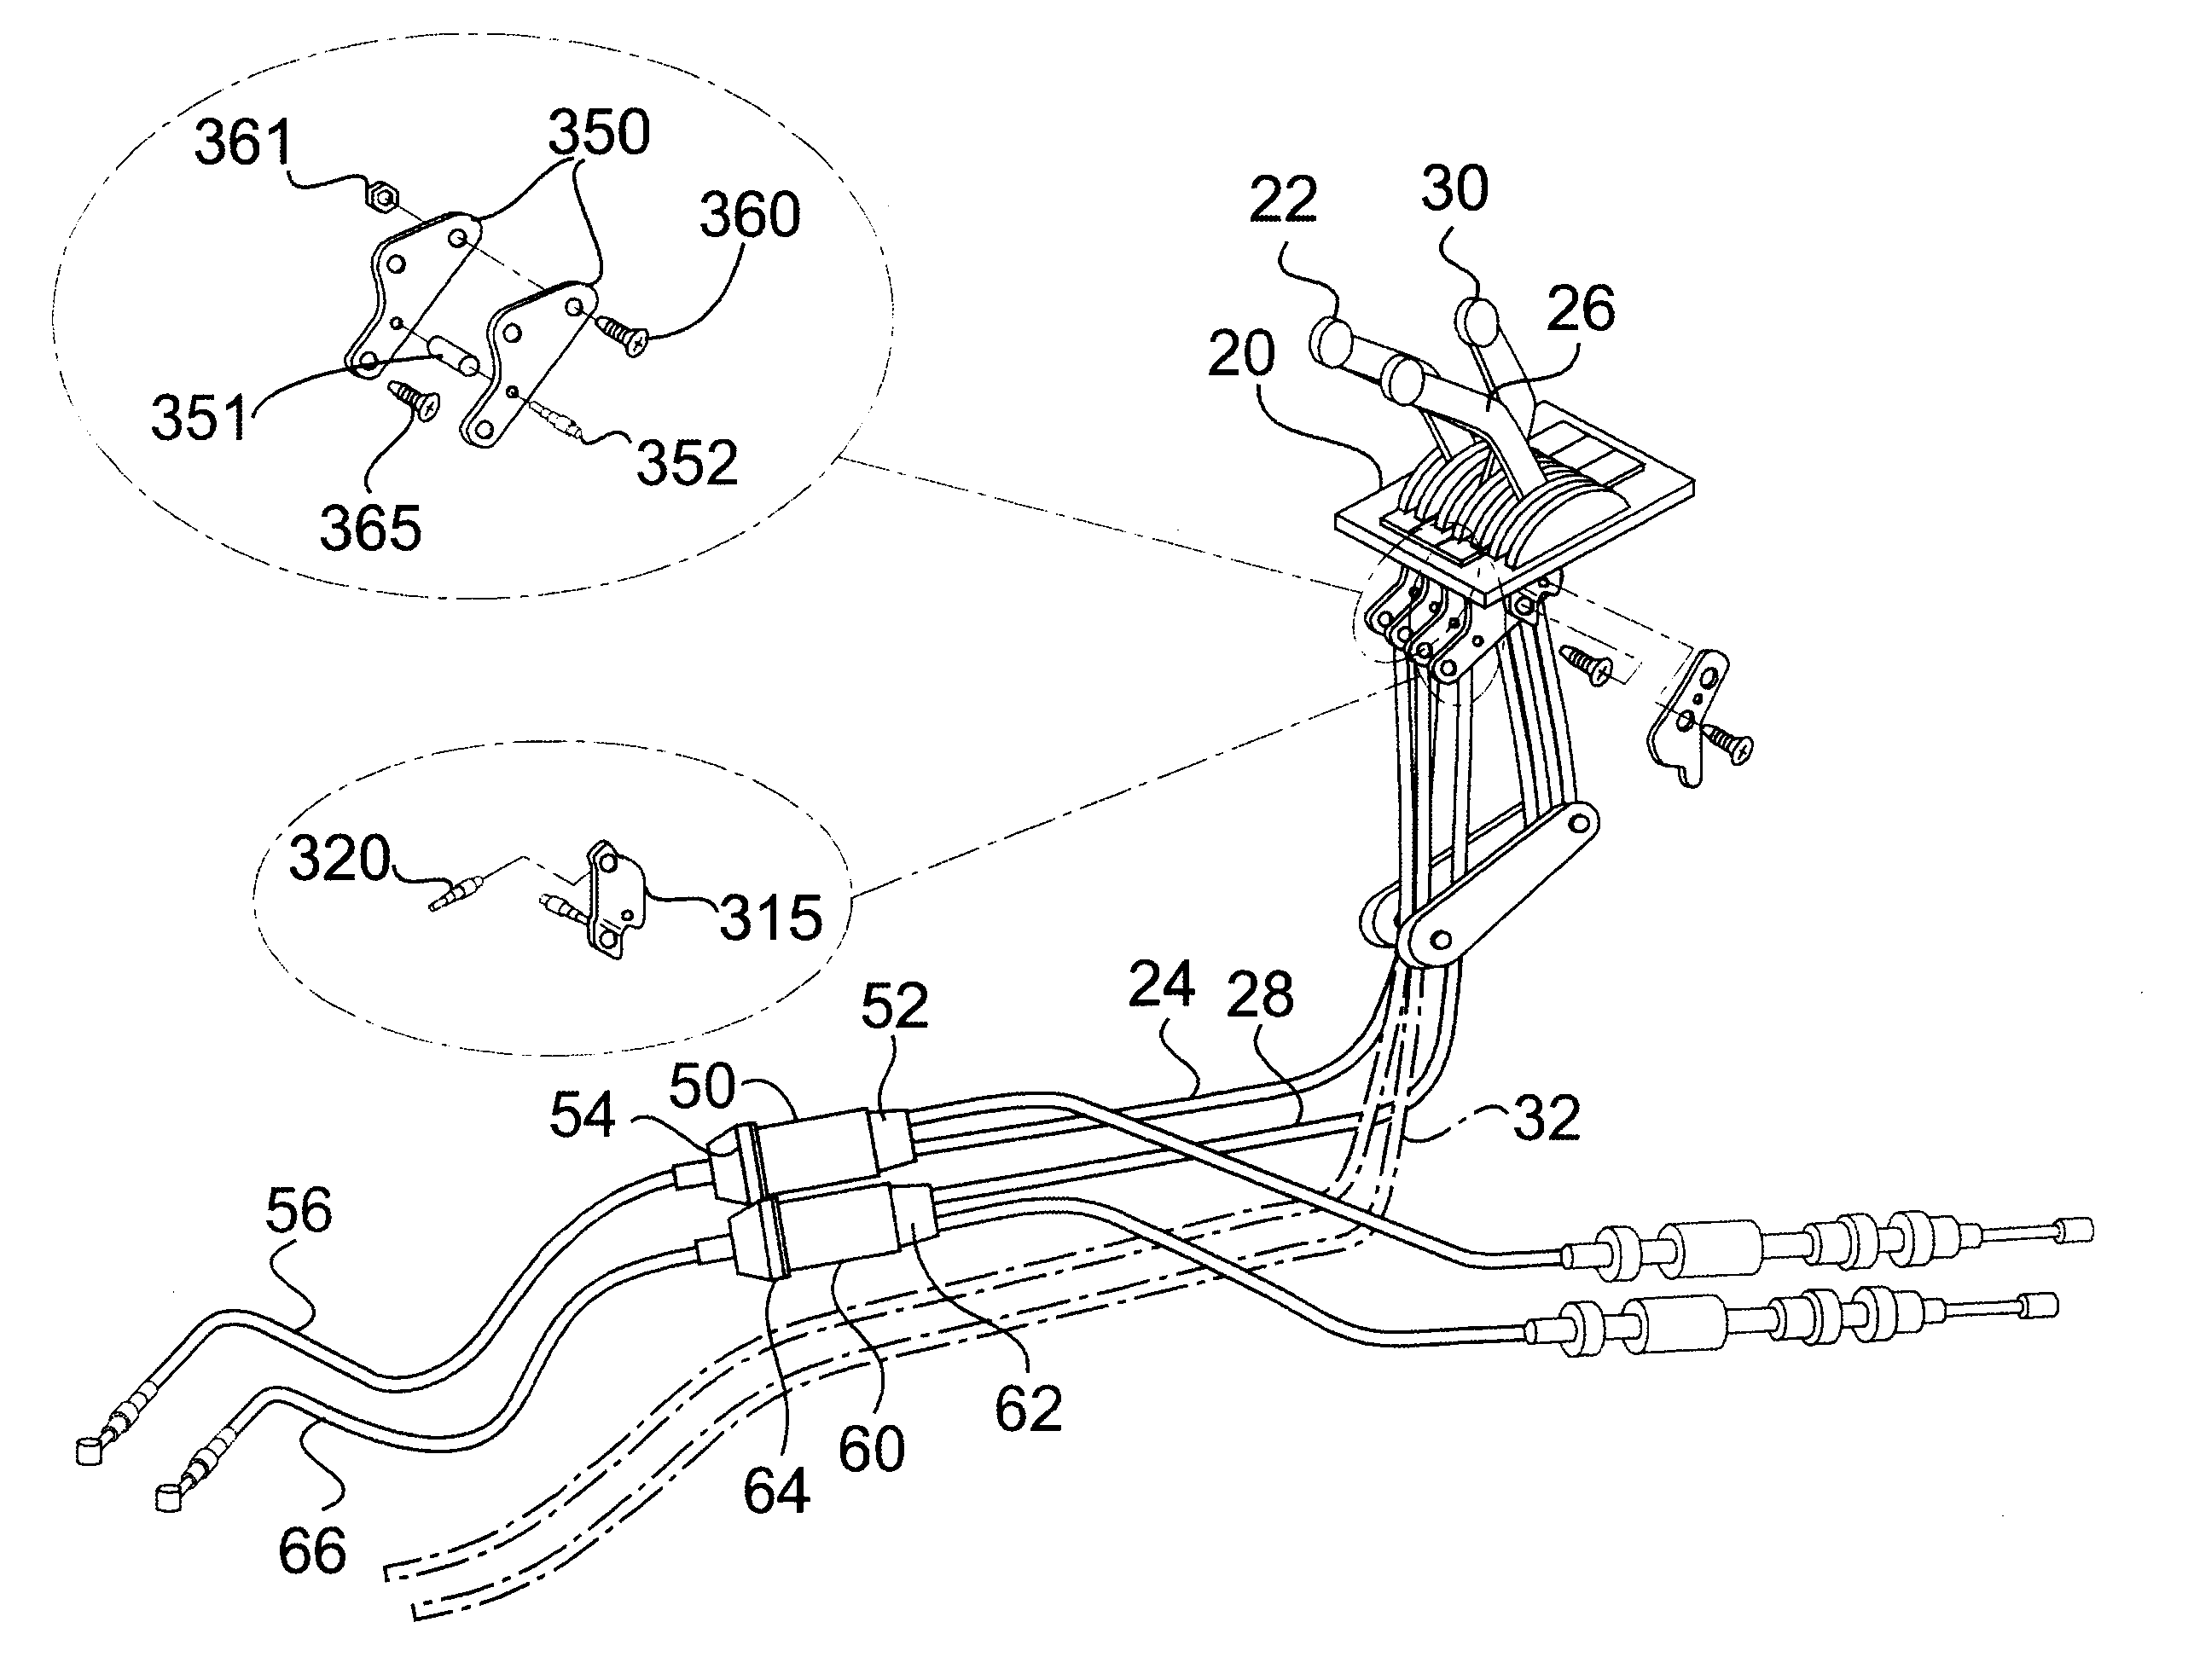 Watercraft with steer-response engine speed controller